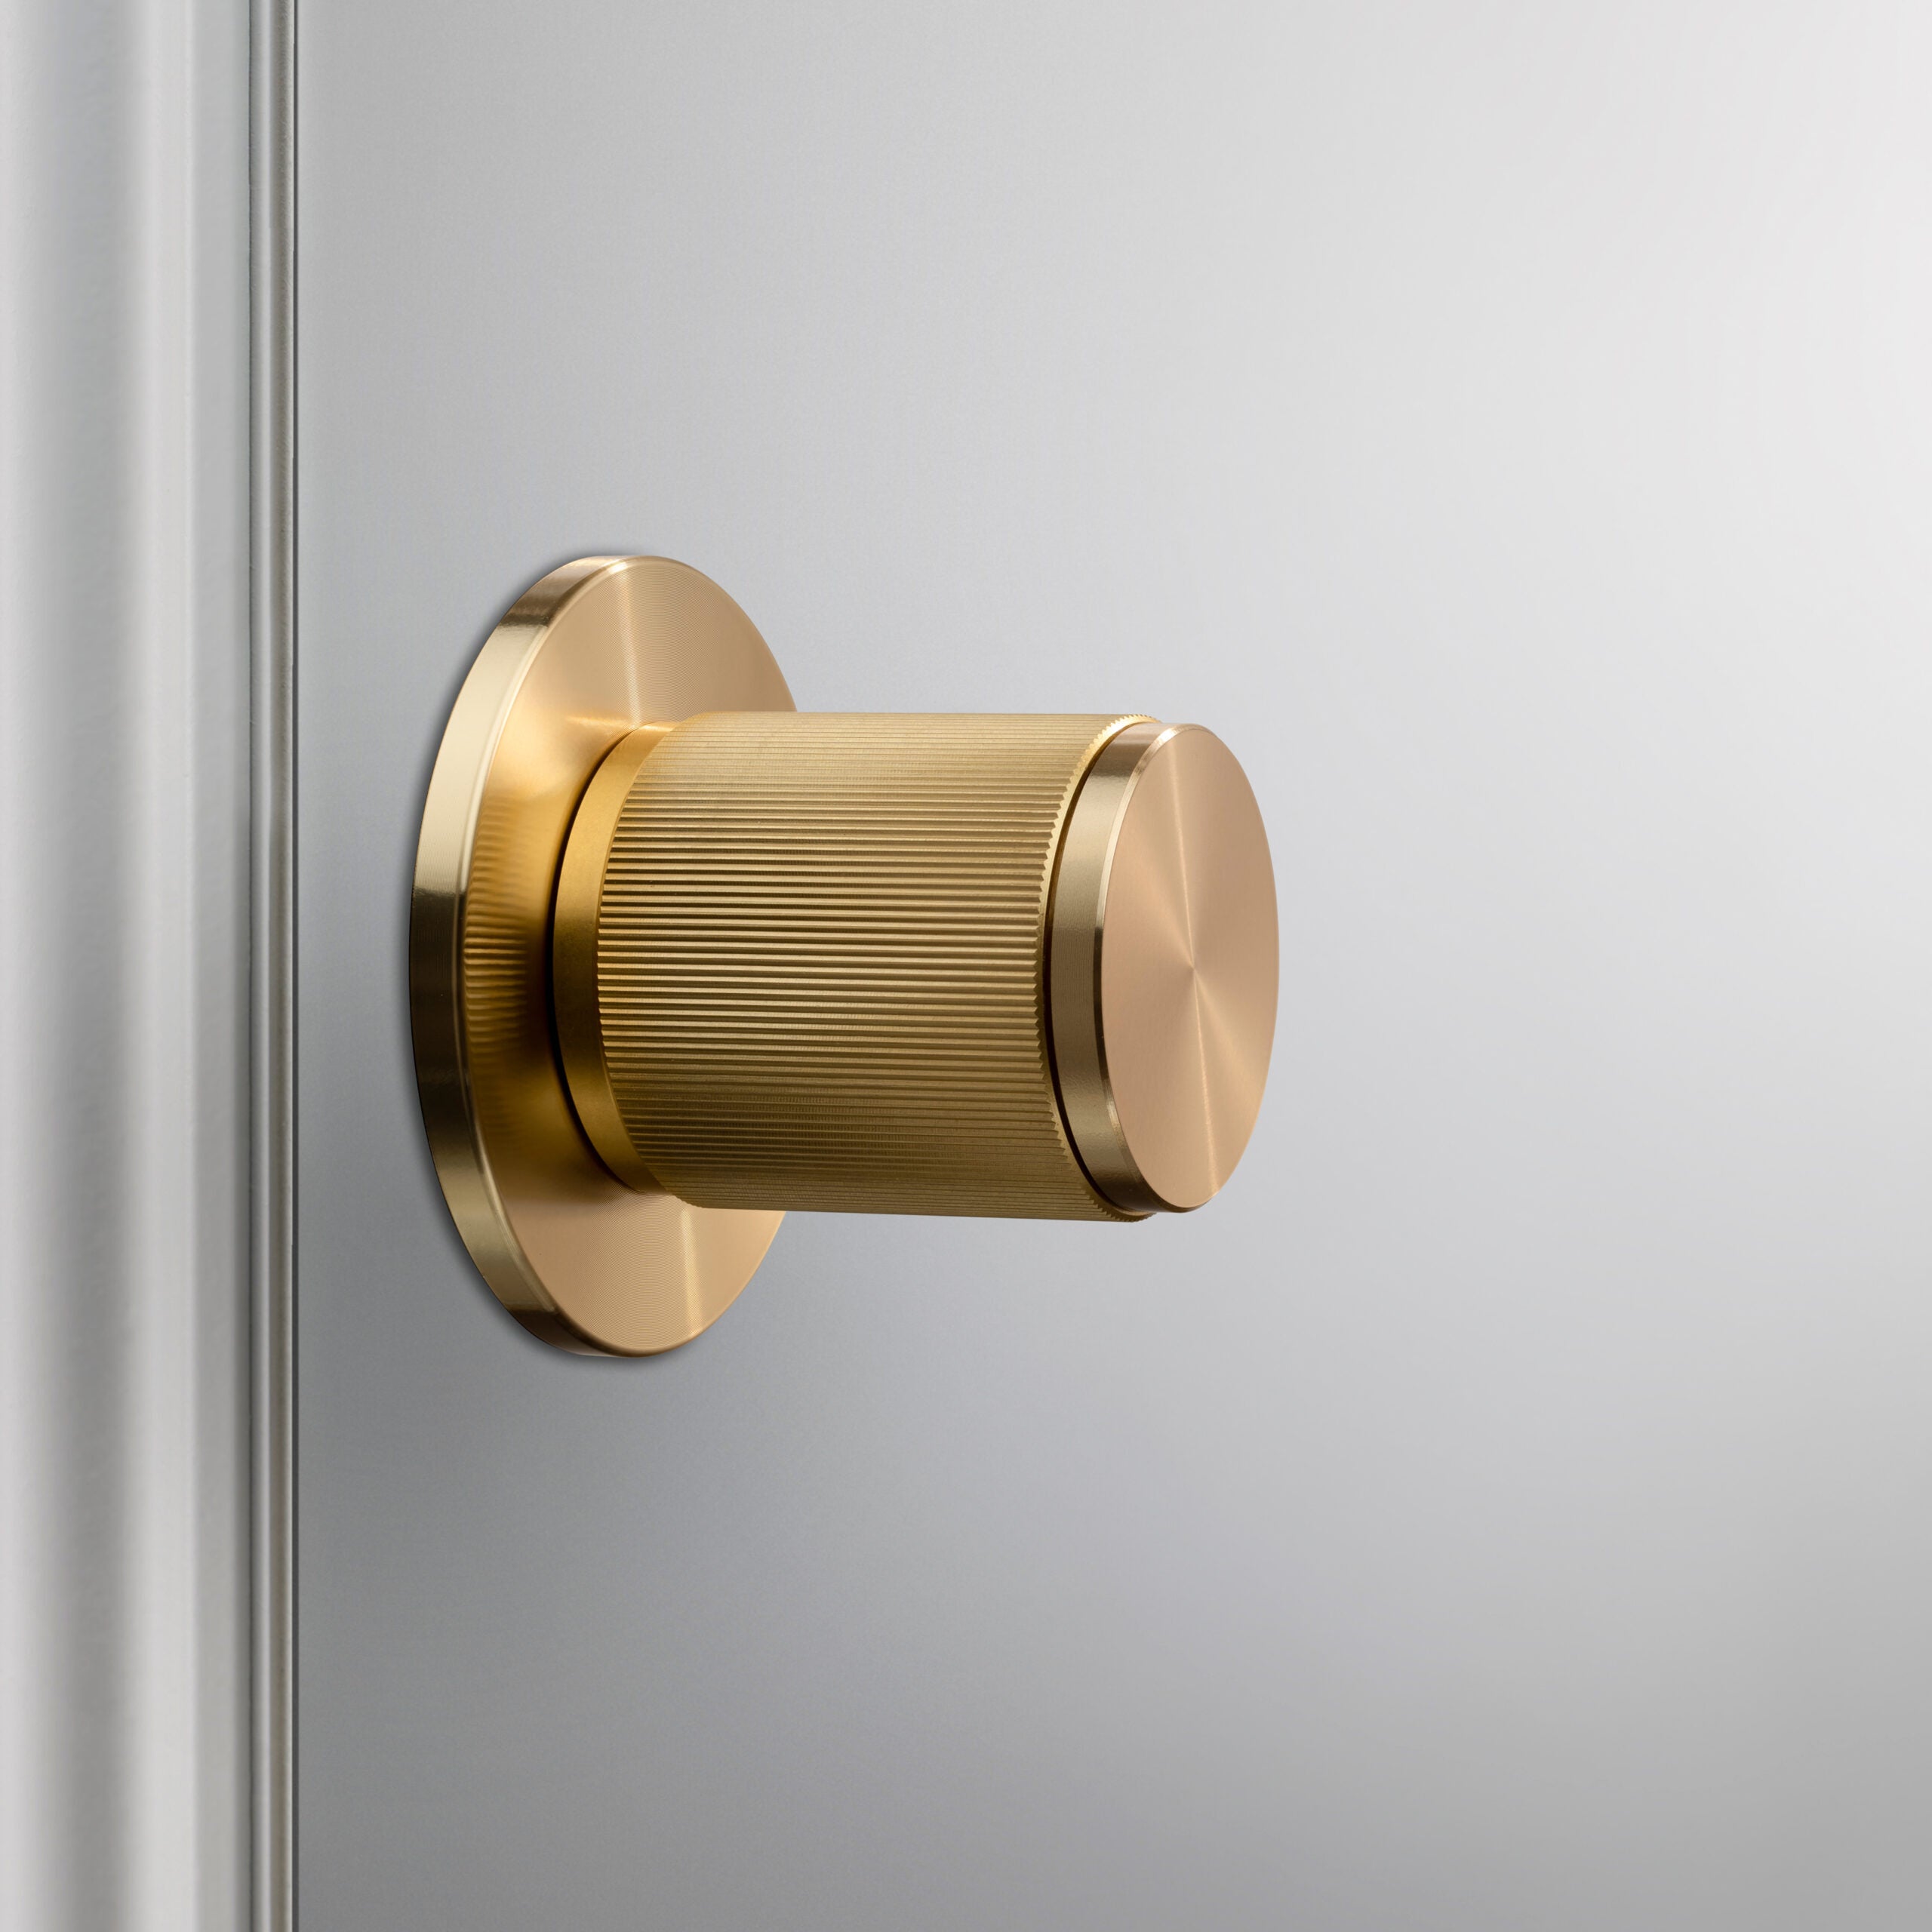 Buster + Punch Conventional Door Handle, Linear Design - PASSAGE TYPE Hardware Buster + Punch   